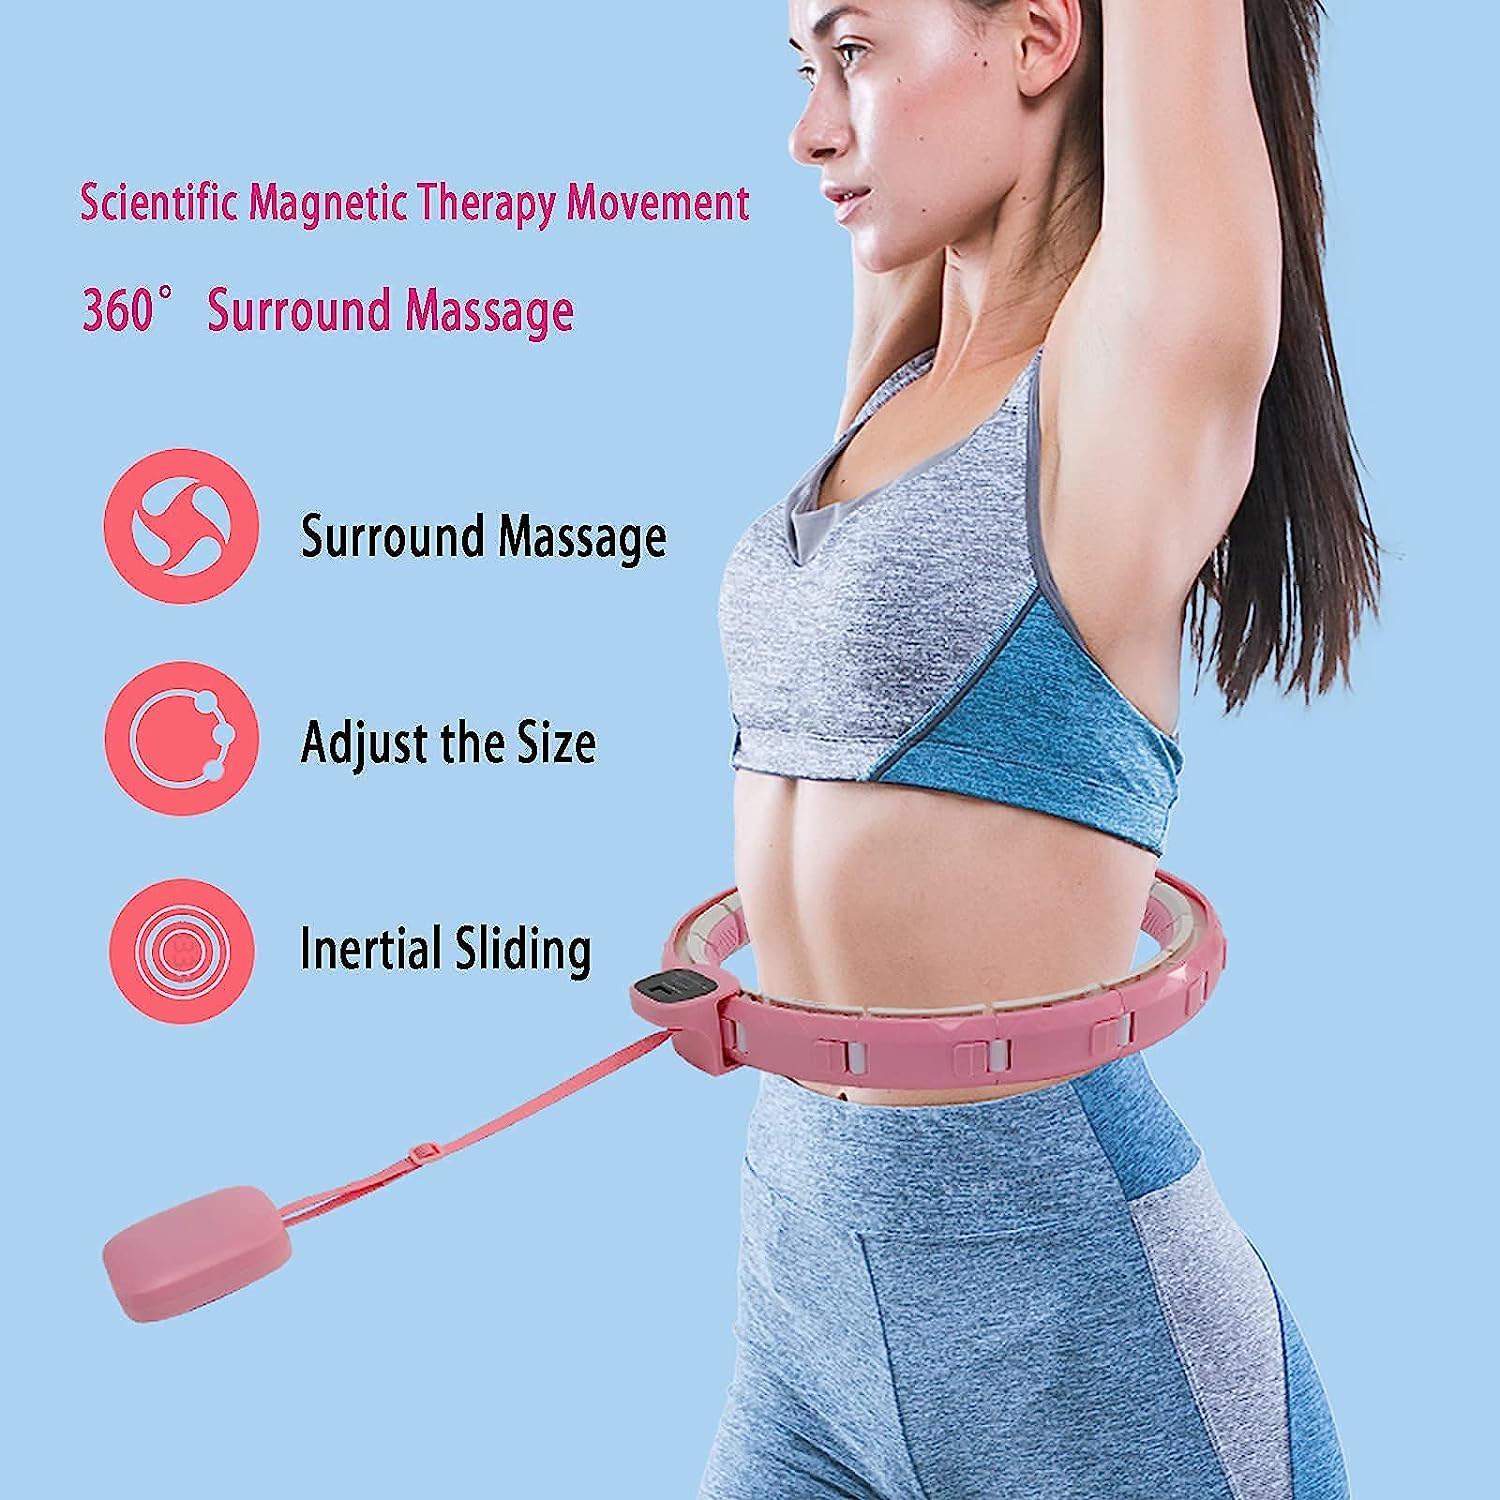 Fitness Adjustable Detachable Fitness Hula Hoop Ring Smart Round Count & Weight Loss Gym Equipment Exercise Smart Hula Hoops